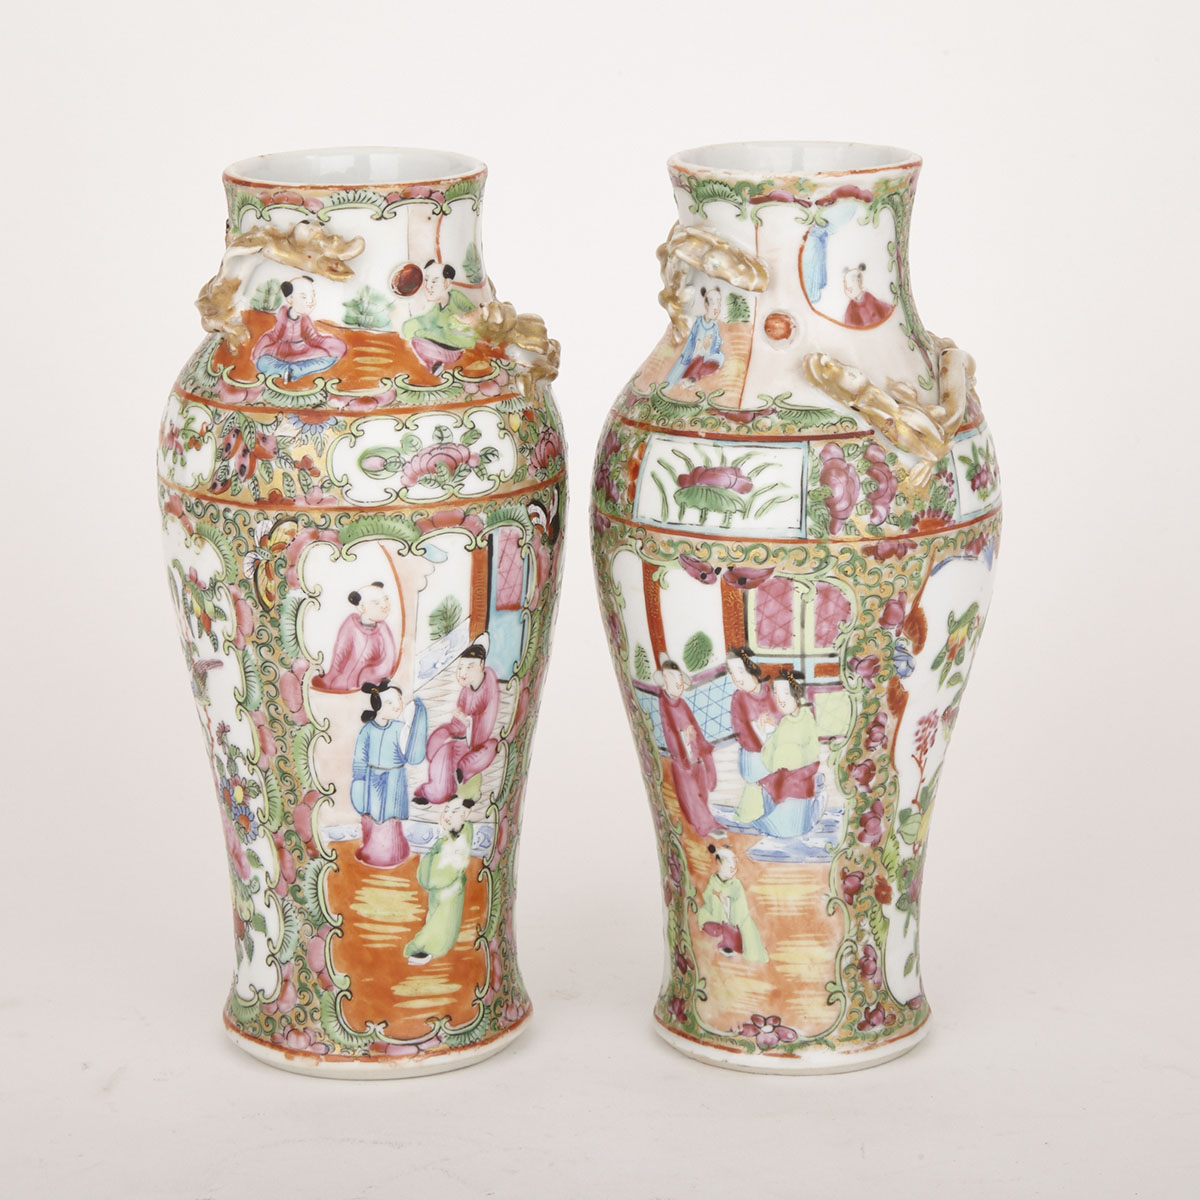 Pair of Canton Famille Rose Vases, late 19th C.